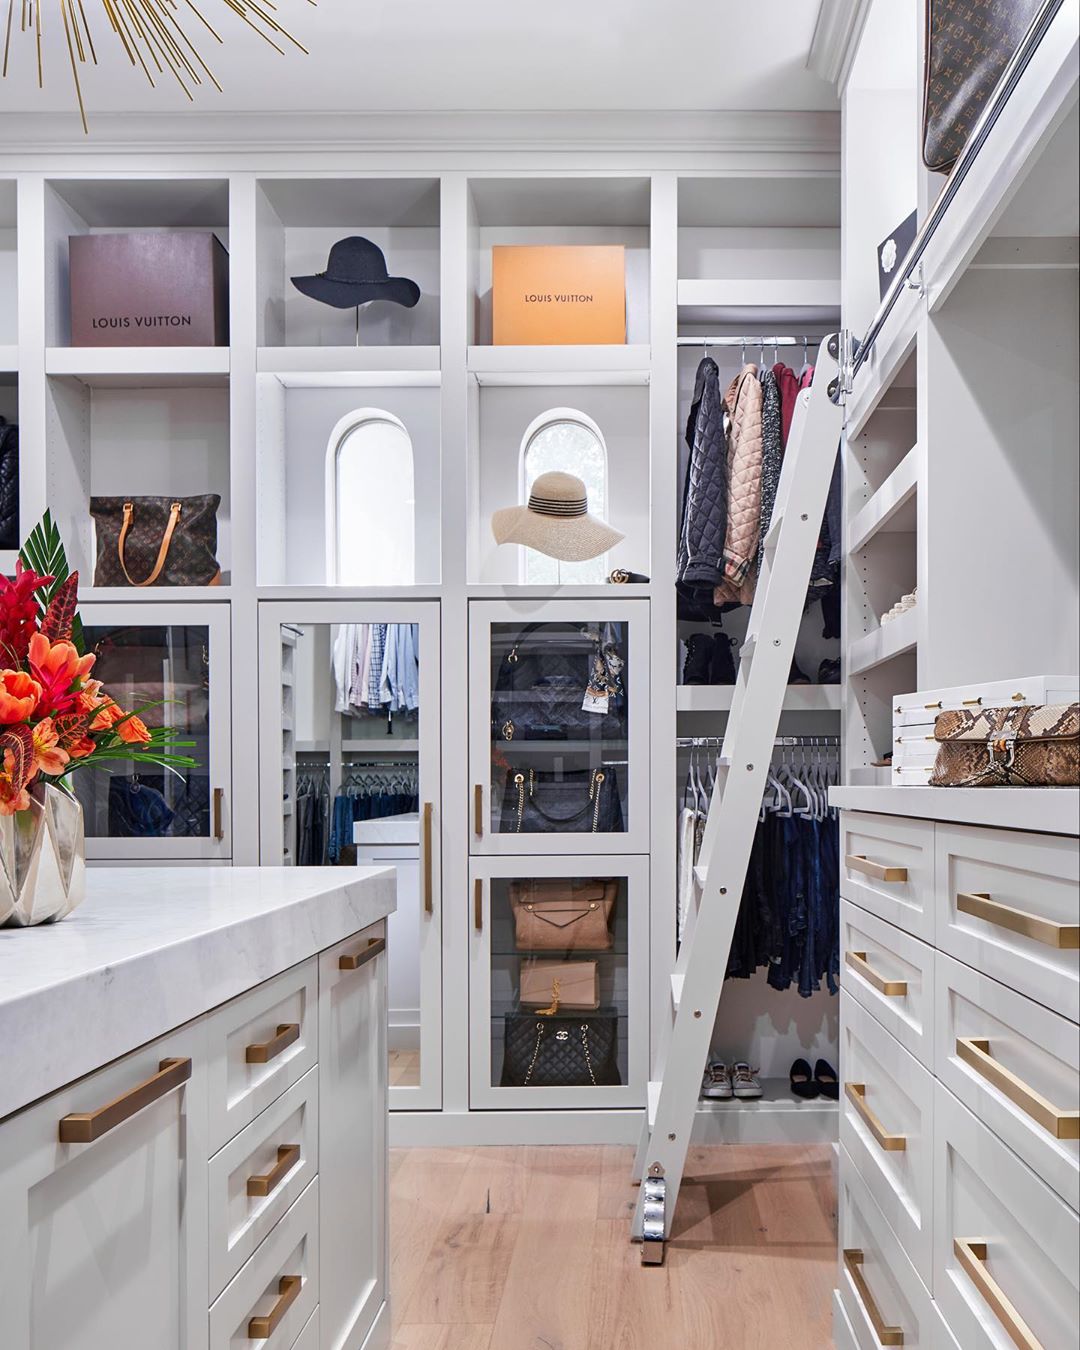 Walk-in closet with rolling ladder. Photo by Instagram user @havendesignandconstruction